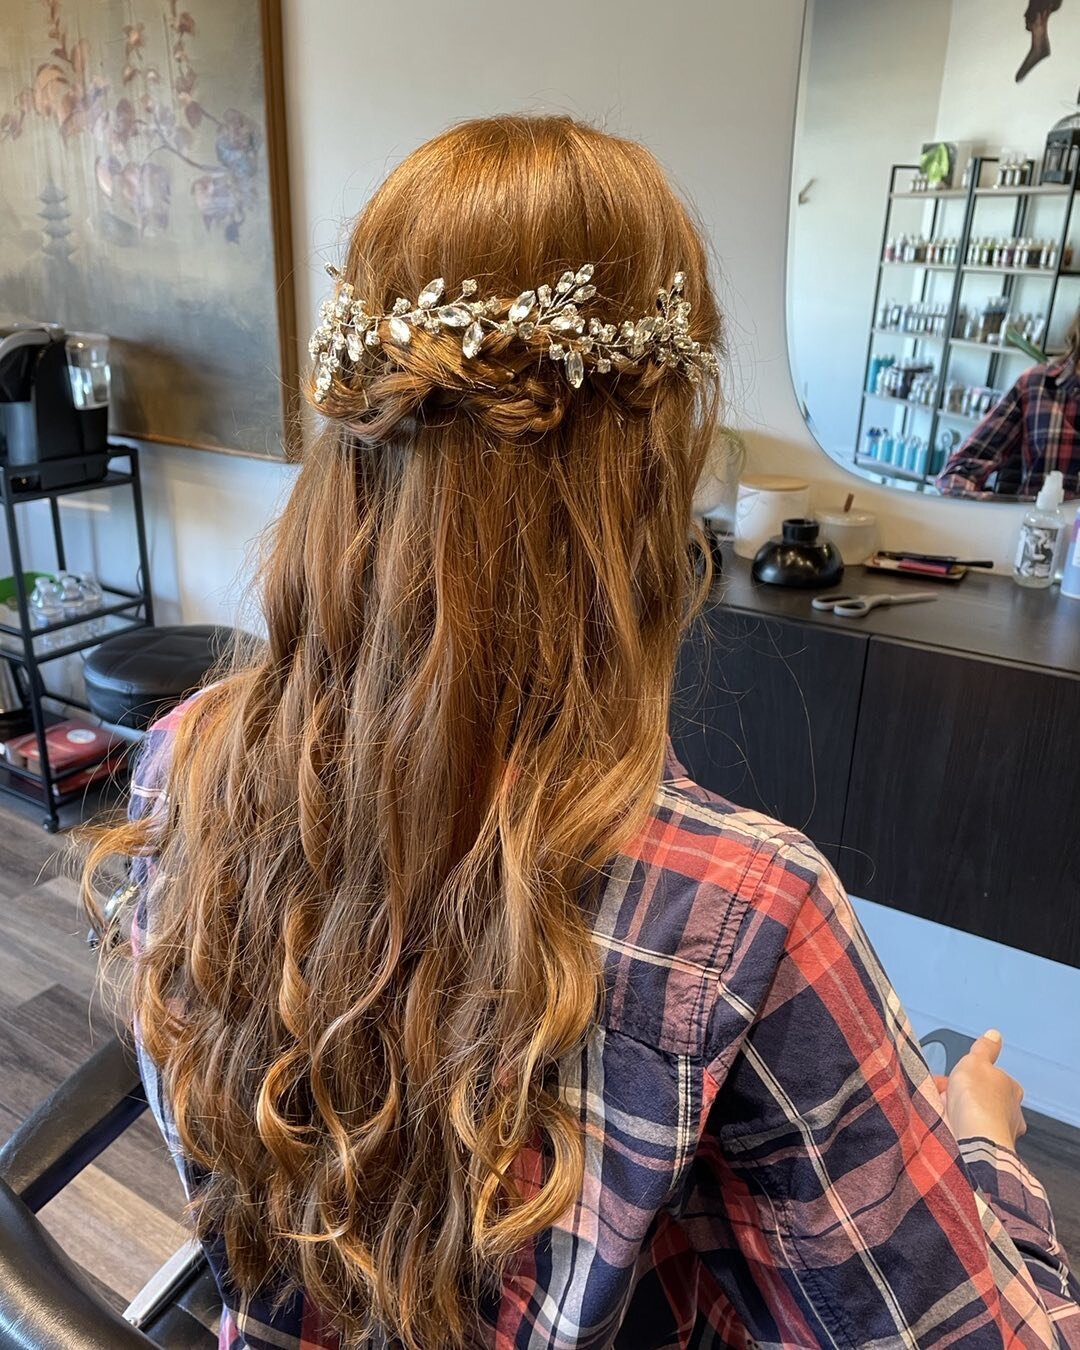 We 💖 doing your hair for that special day!